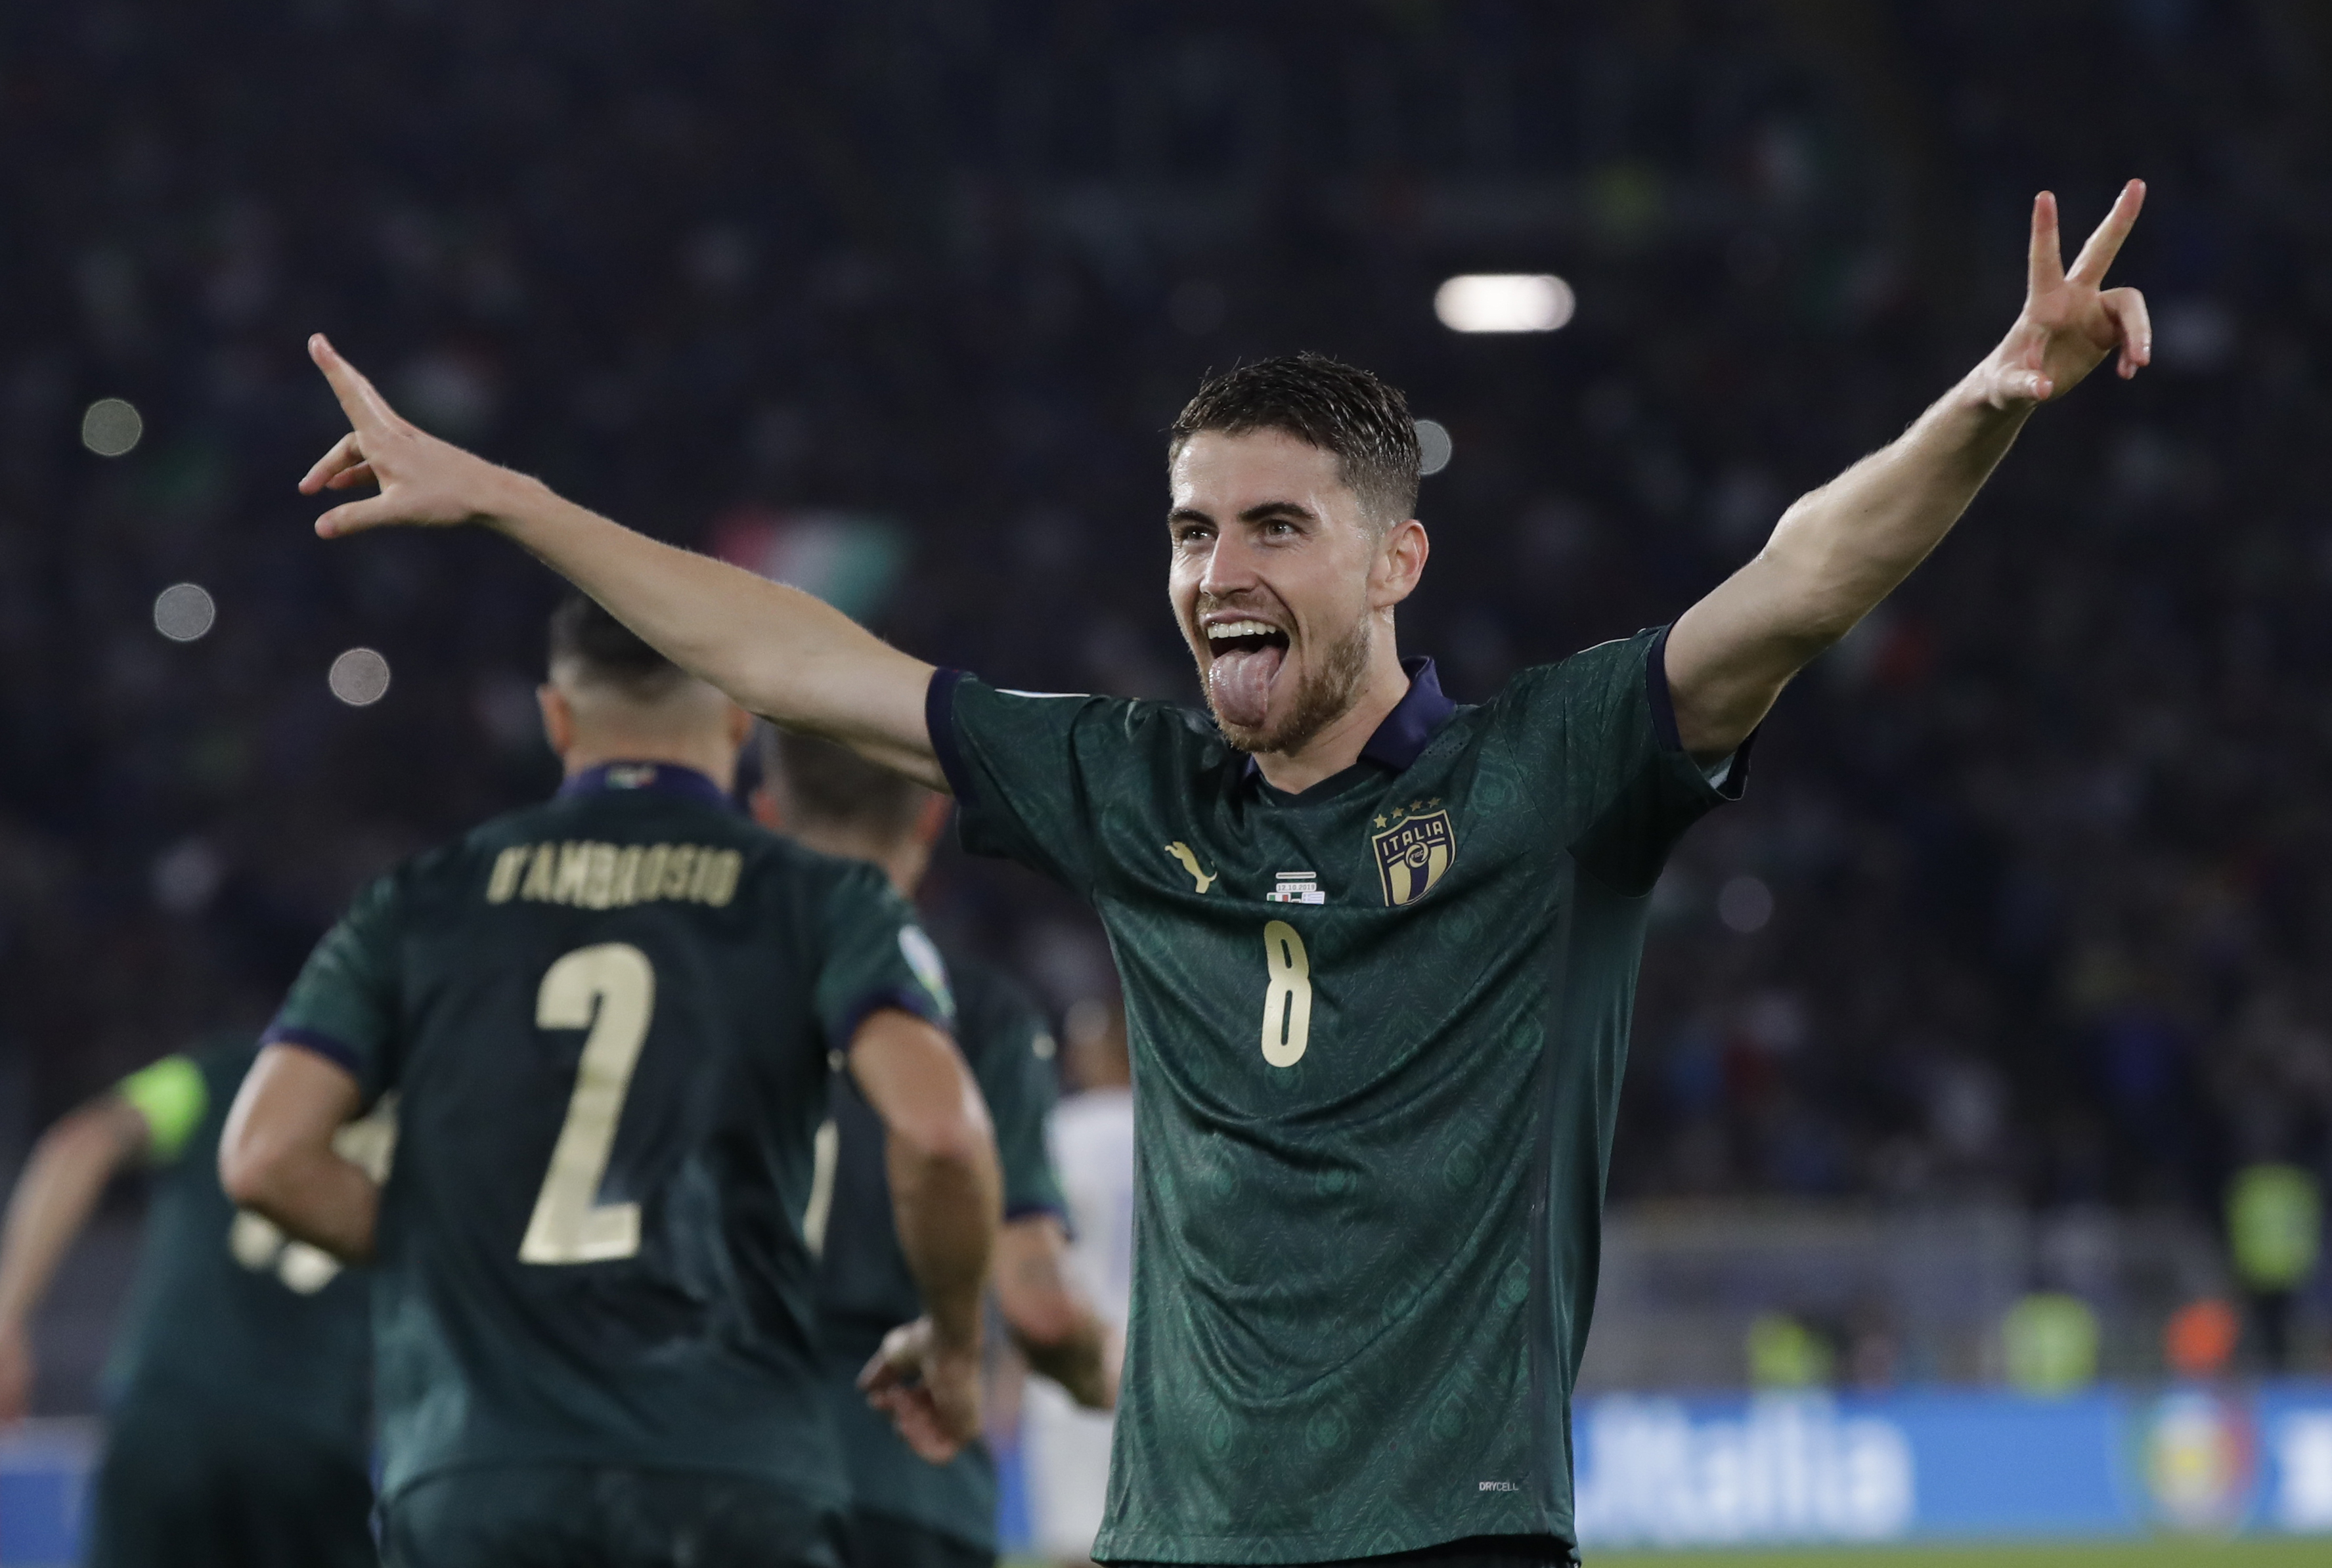 Turnaround: Italy qualifies for Euros with 3 games to spare